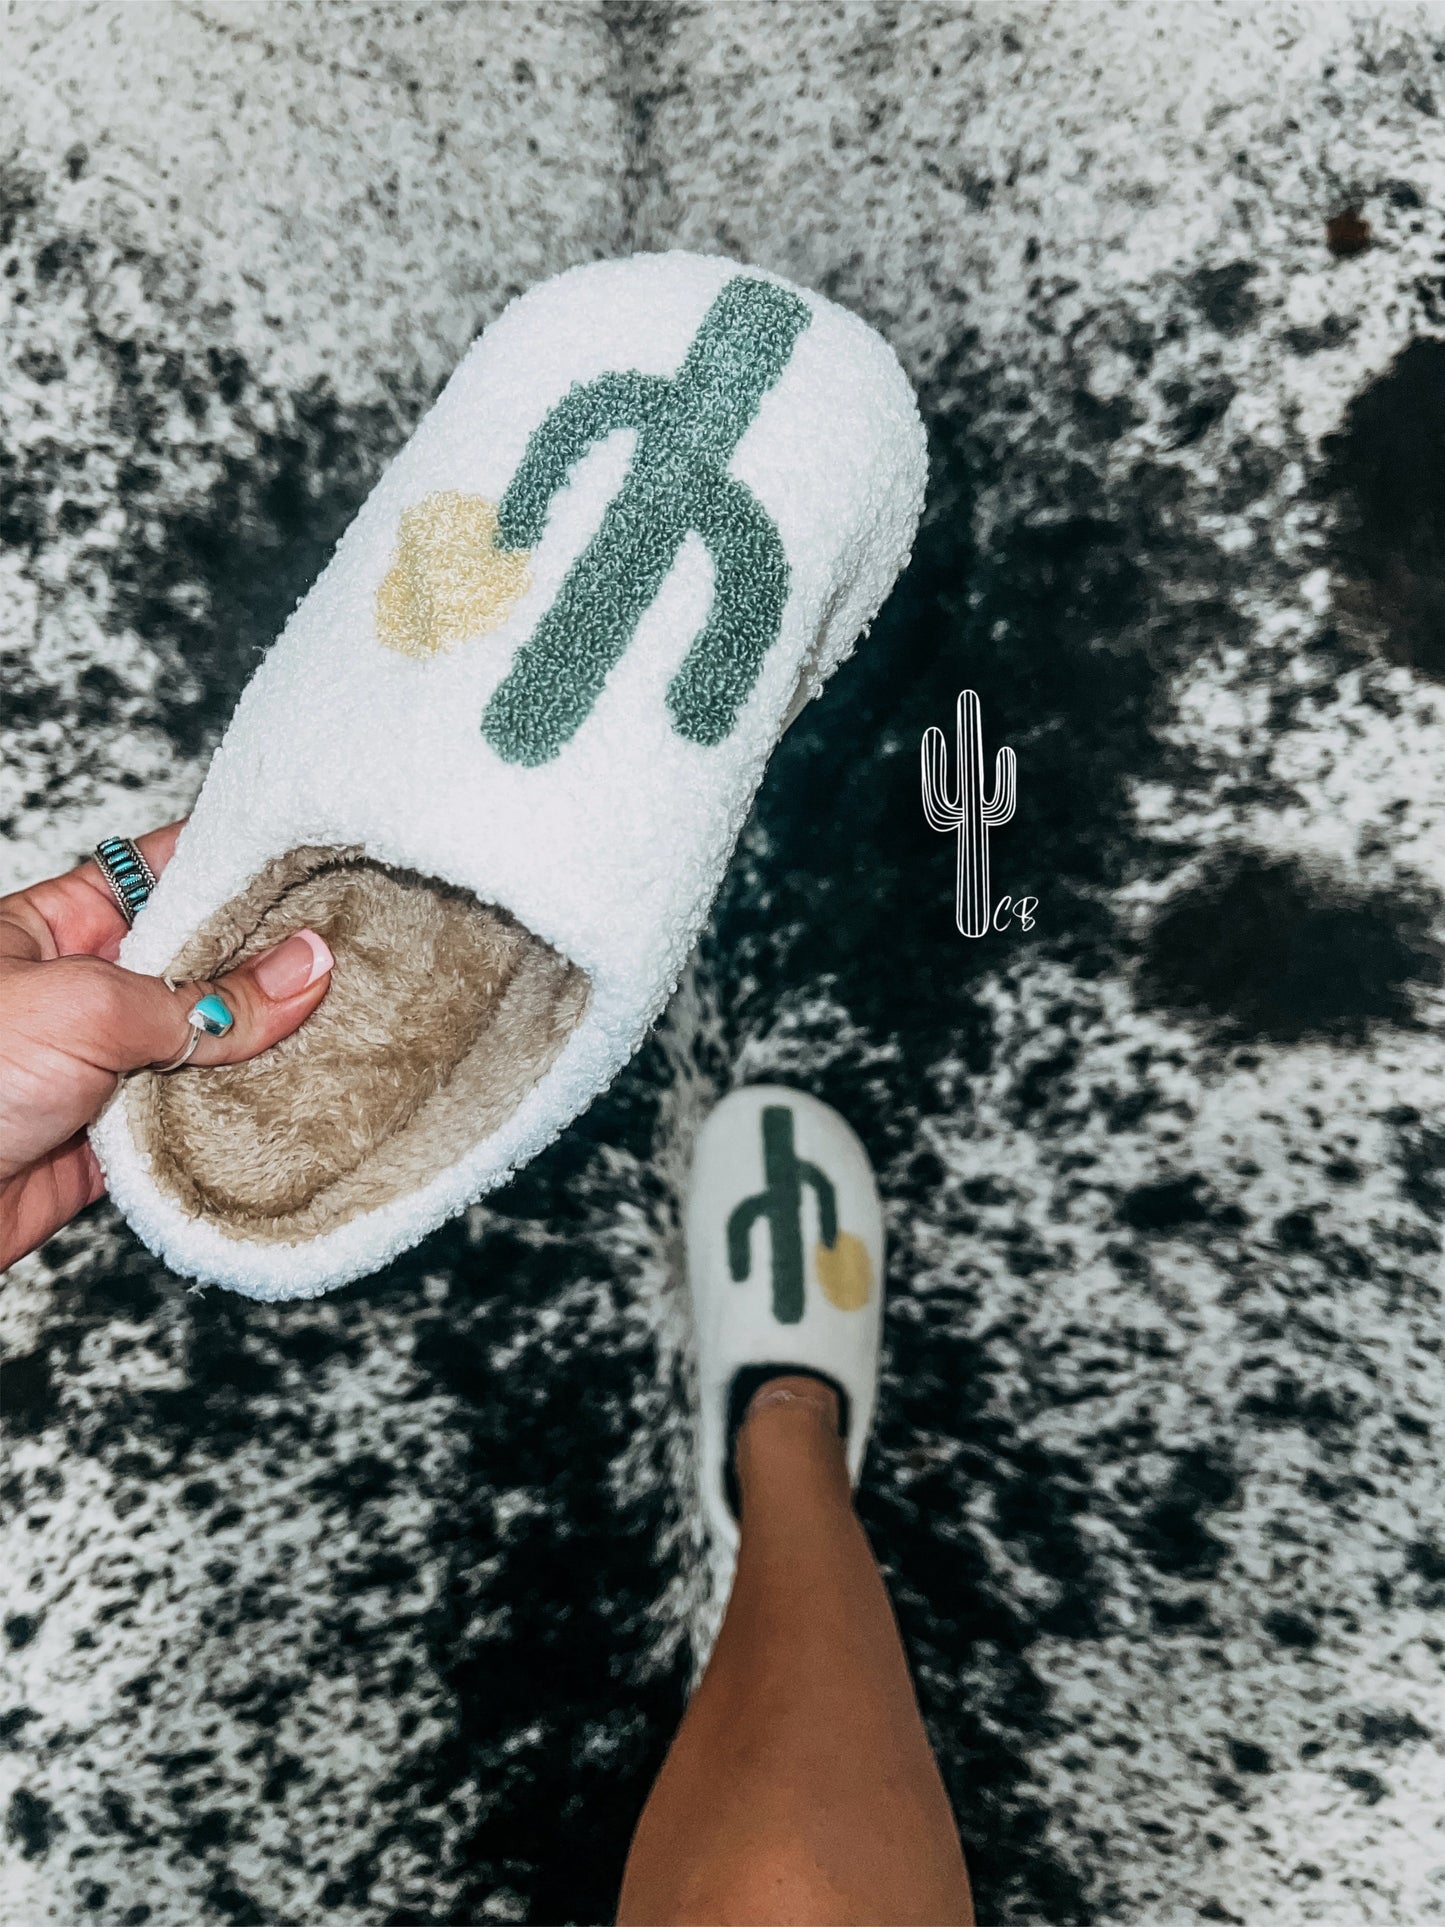 the Keep Me |Cozy| Slippers